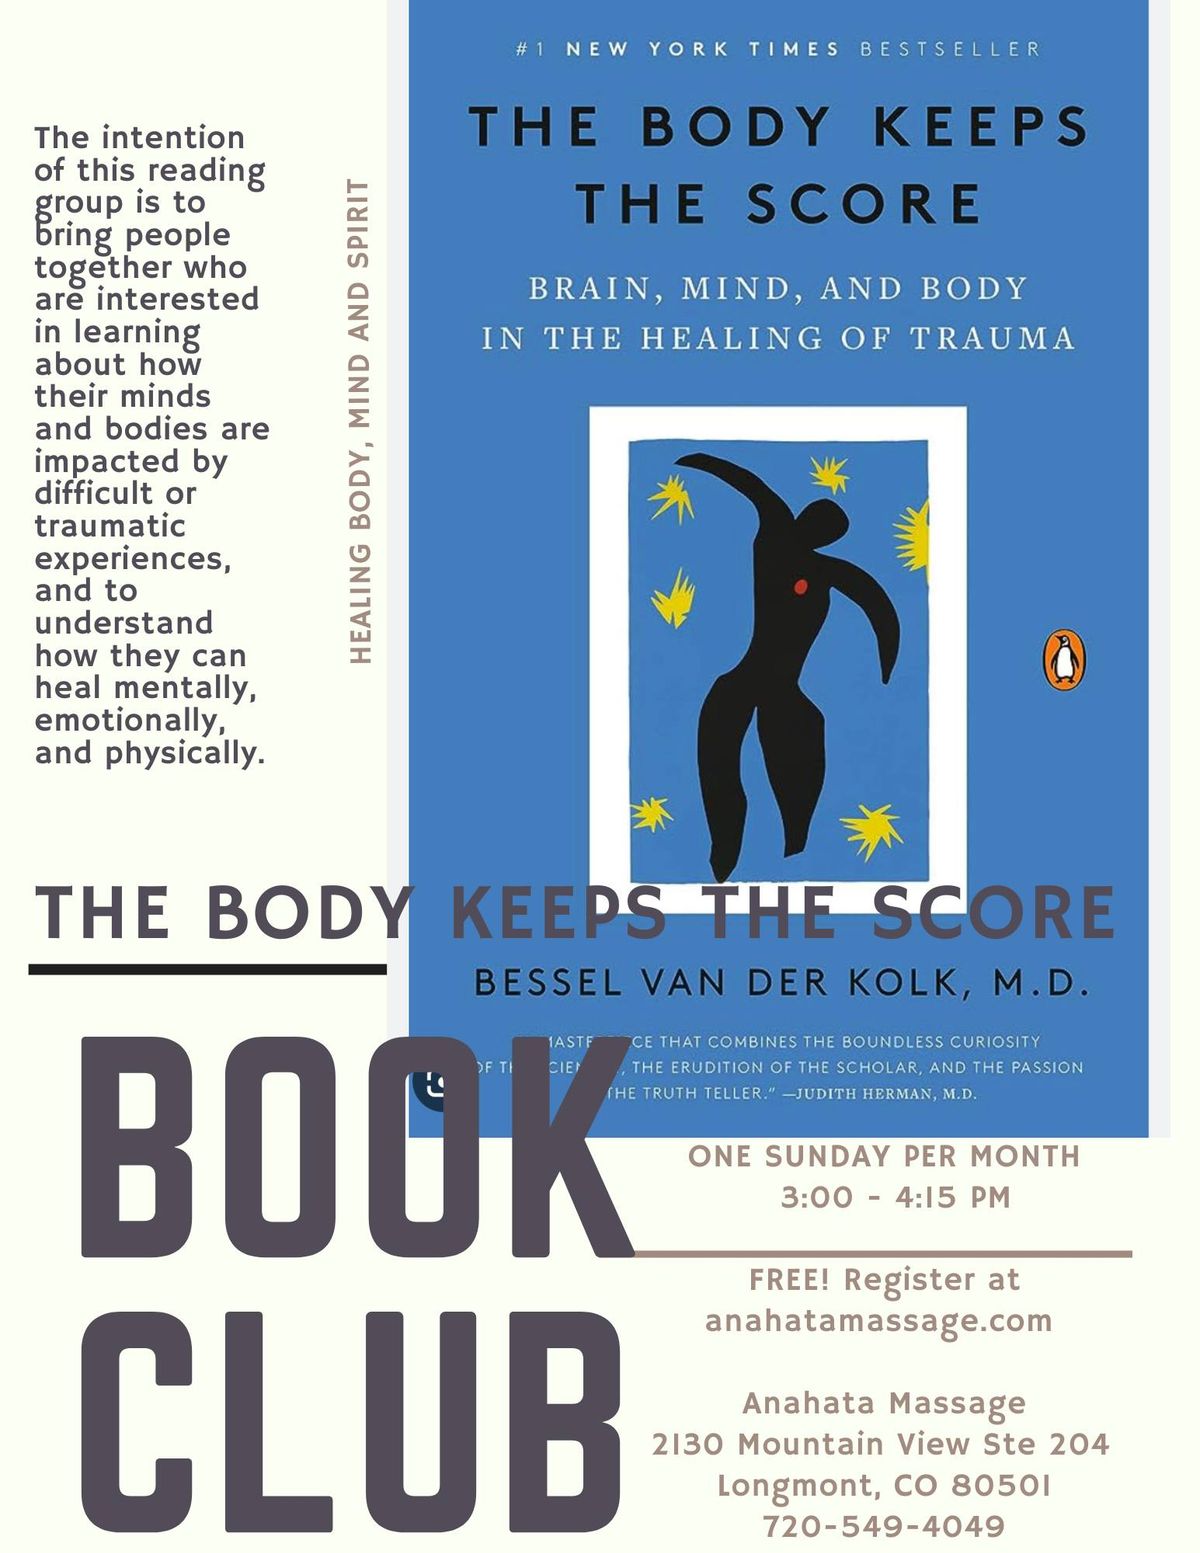 The Body Keeps the Score Book Club